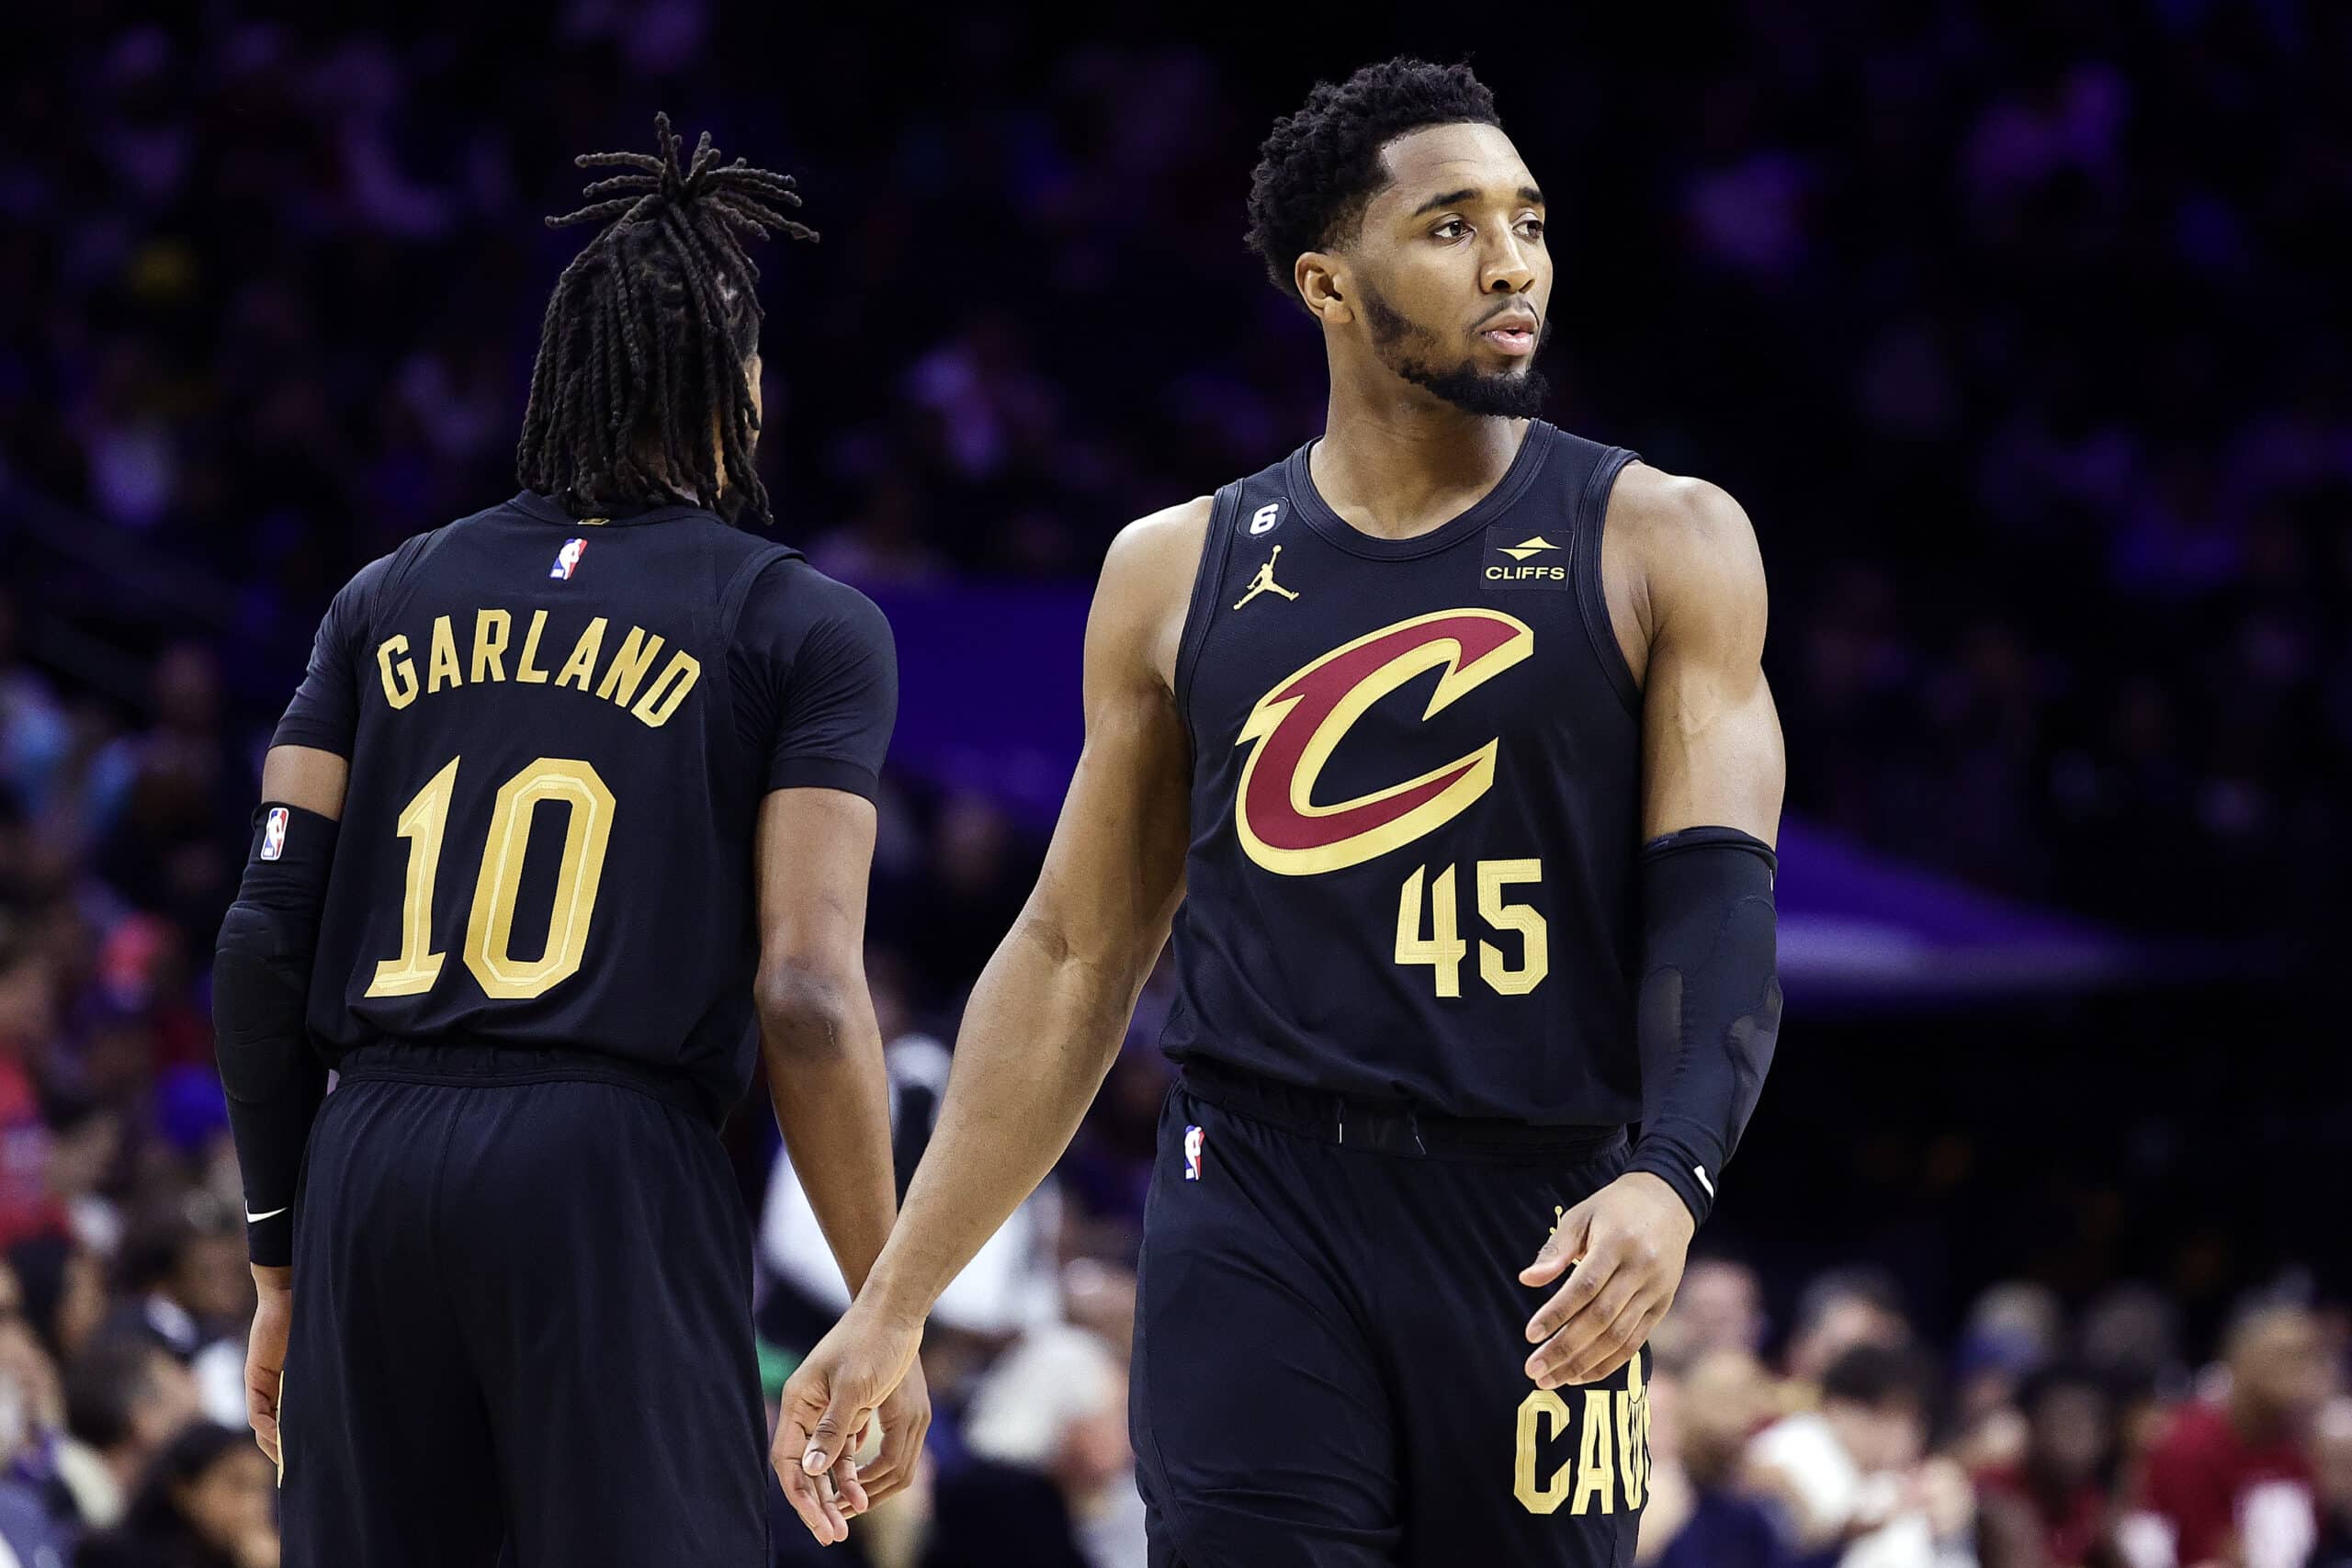 It's do-or-die time for Isaac Okoro and the Cleveland Cavaliers